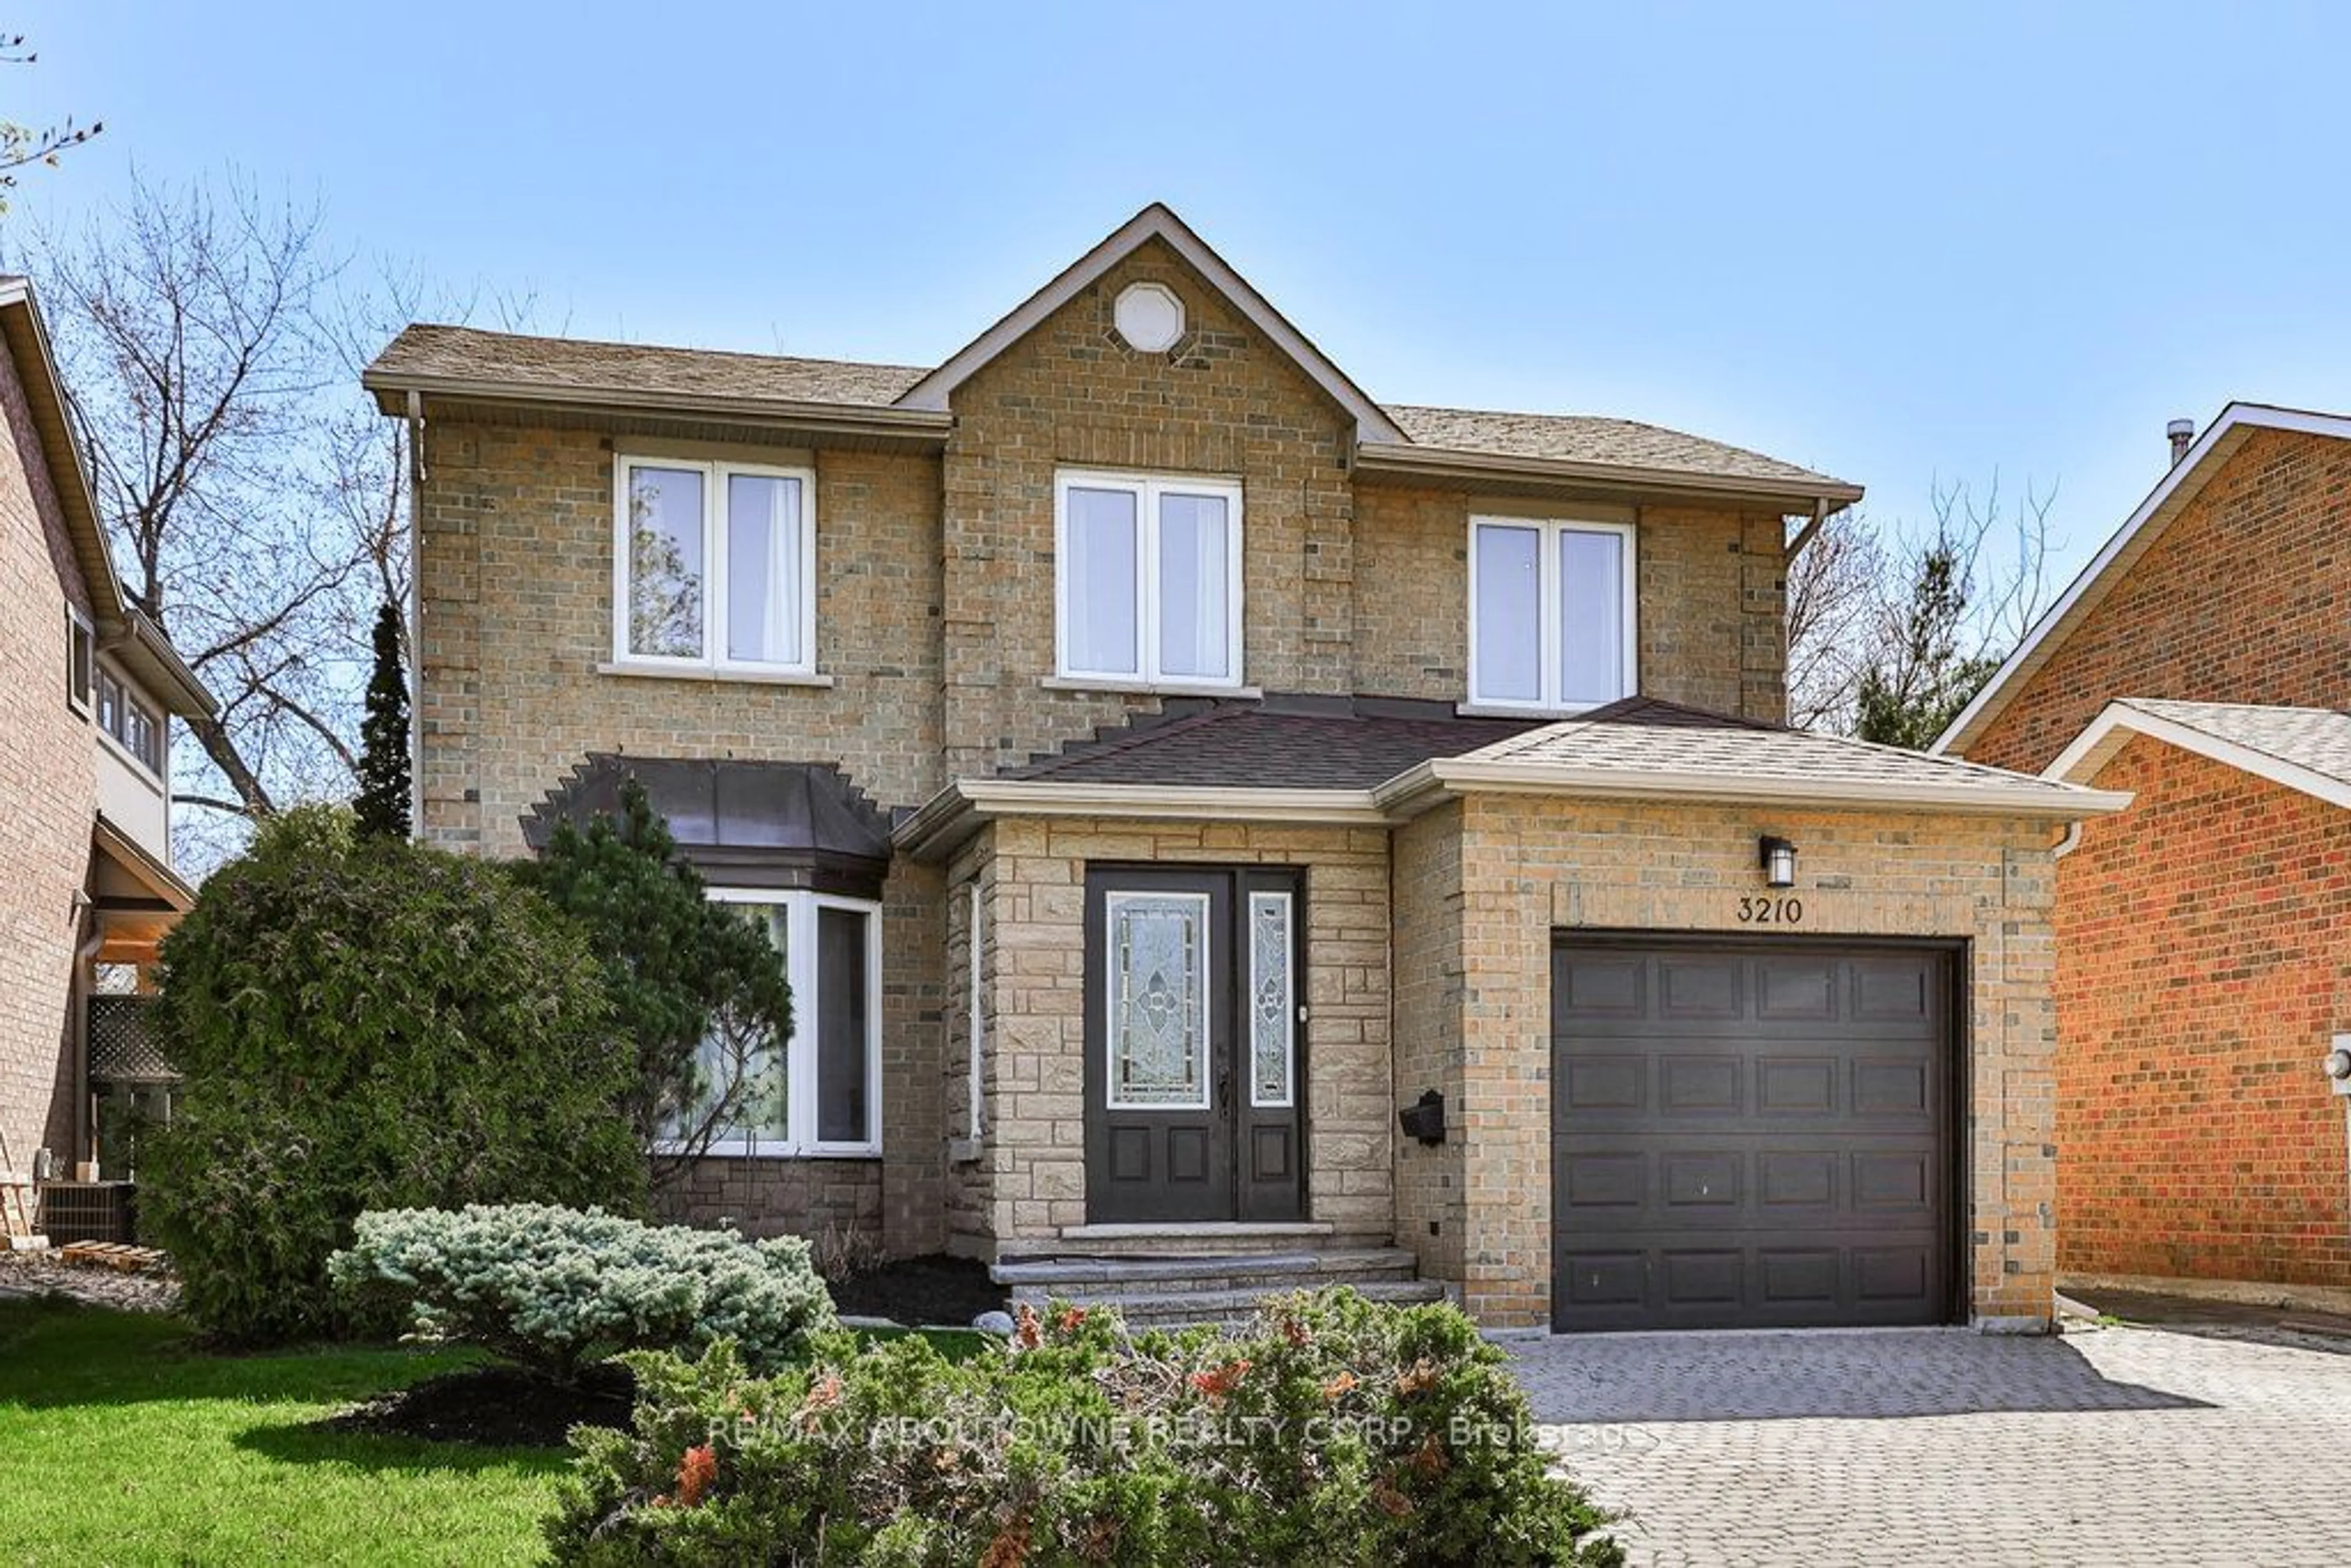 Home with brick exterior material for 3210 Victoria St, Oakville Ontario L6L 5R2